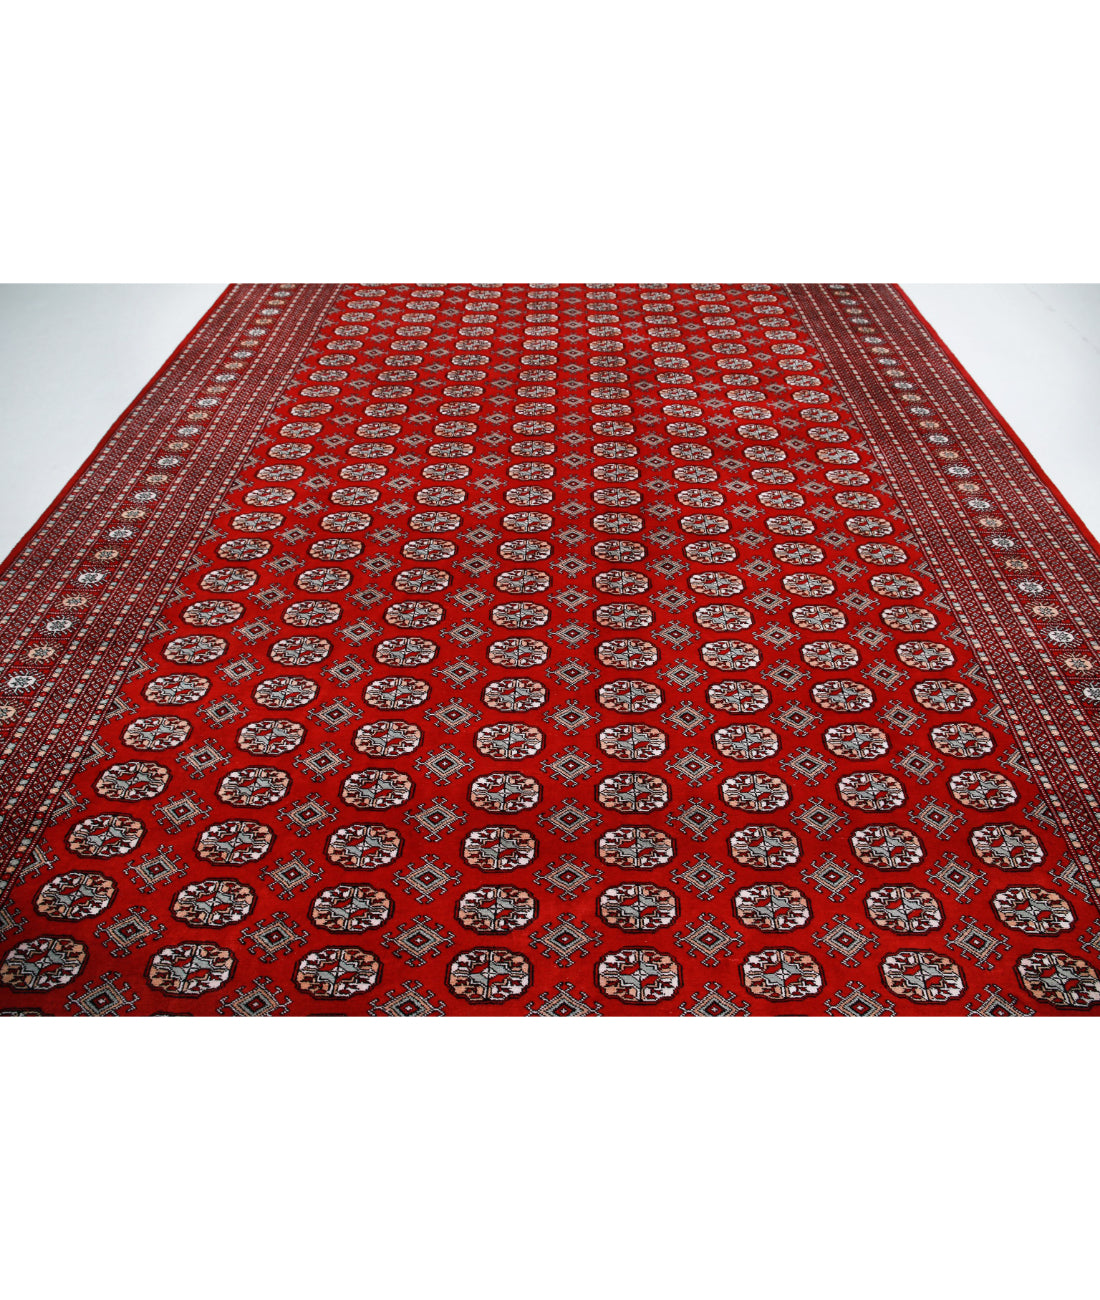 Hand Knotted Tribal Bokhara Wool Rug - 10'2'' x 13'11'' 10'2'' x 13'11'' (305 X 418) / Red / Black